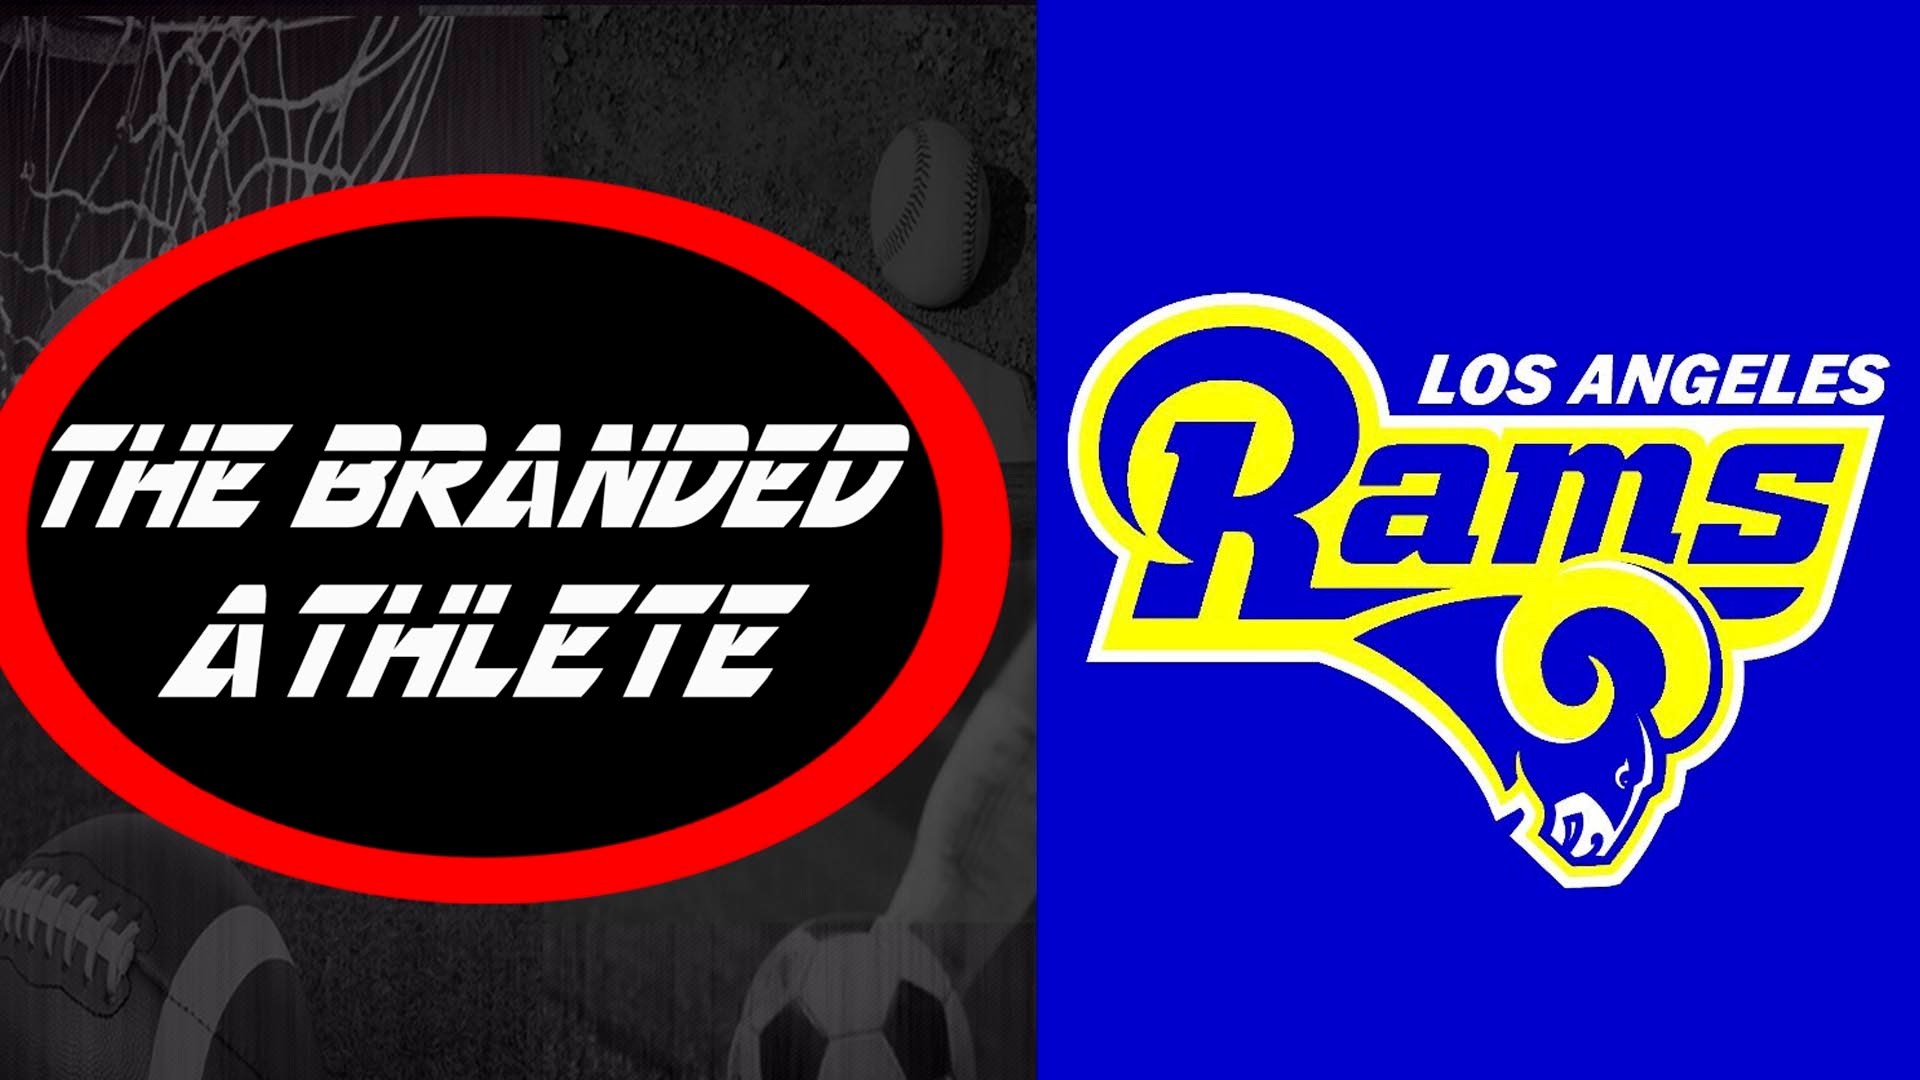 1920x1080 Rams Moving To Los Angeles, All Time NBA Greats and More! | The Branded  Athlete - YouTube